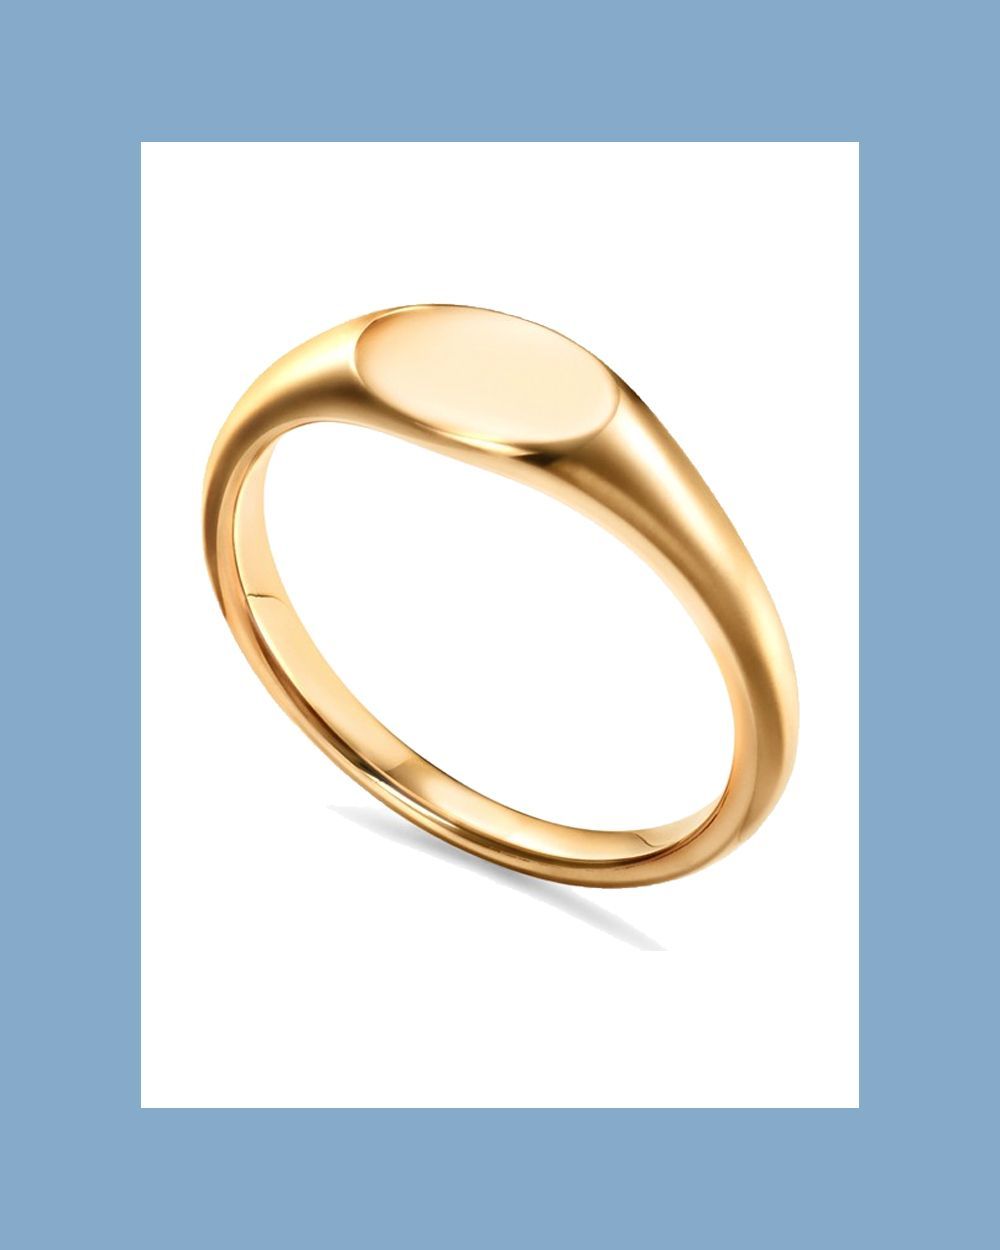 Micro Oval Signet Ring in 18k Gold